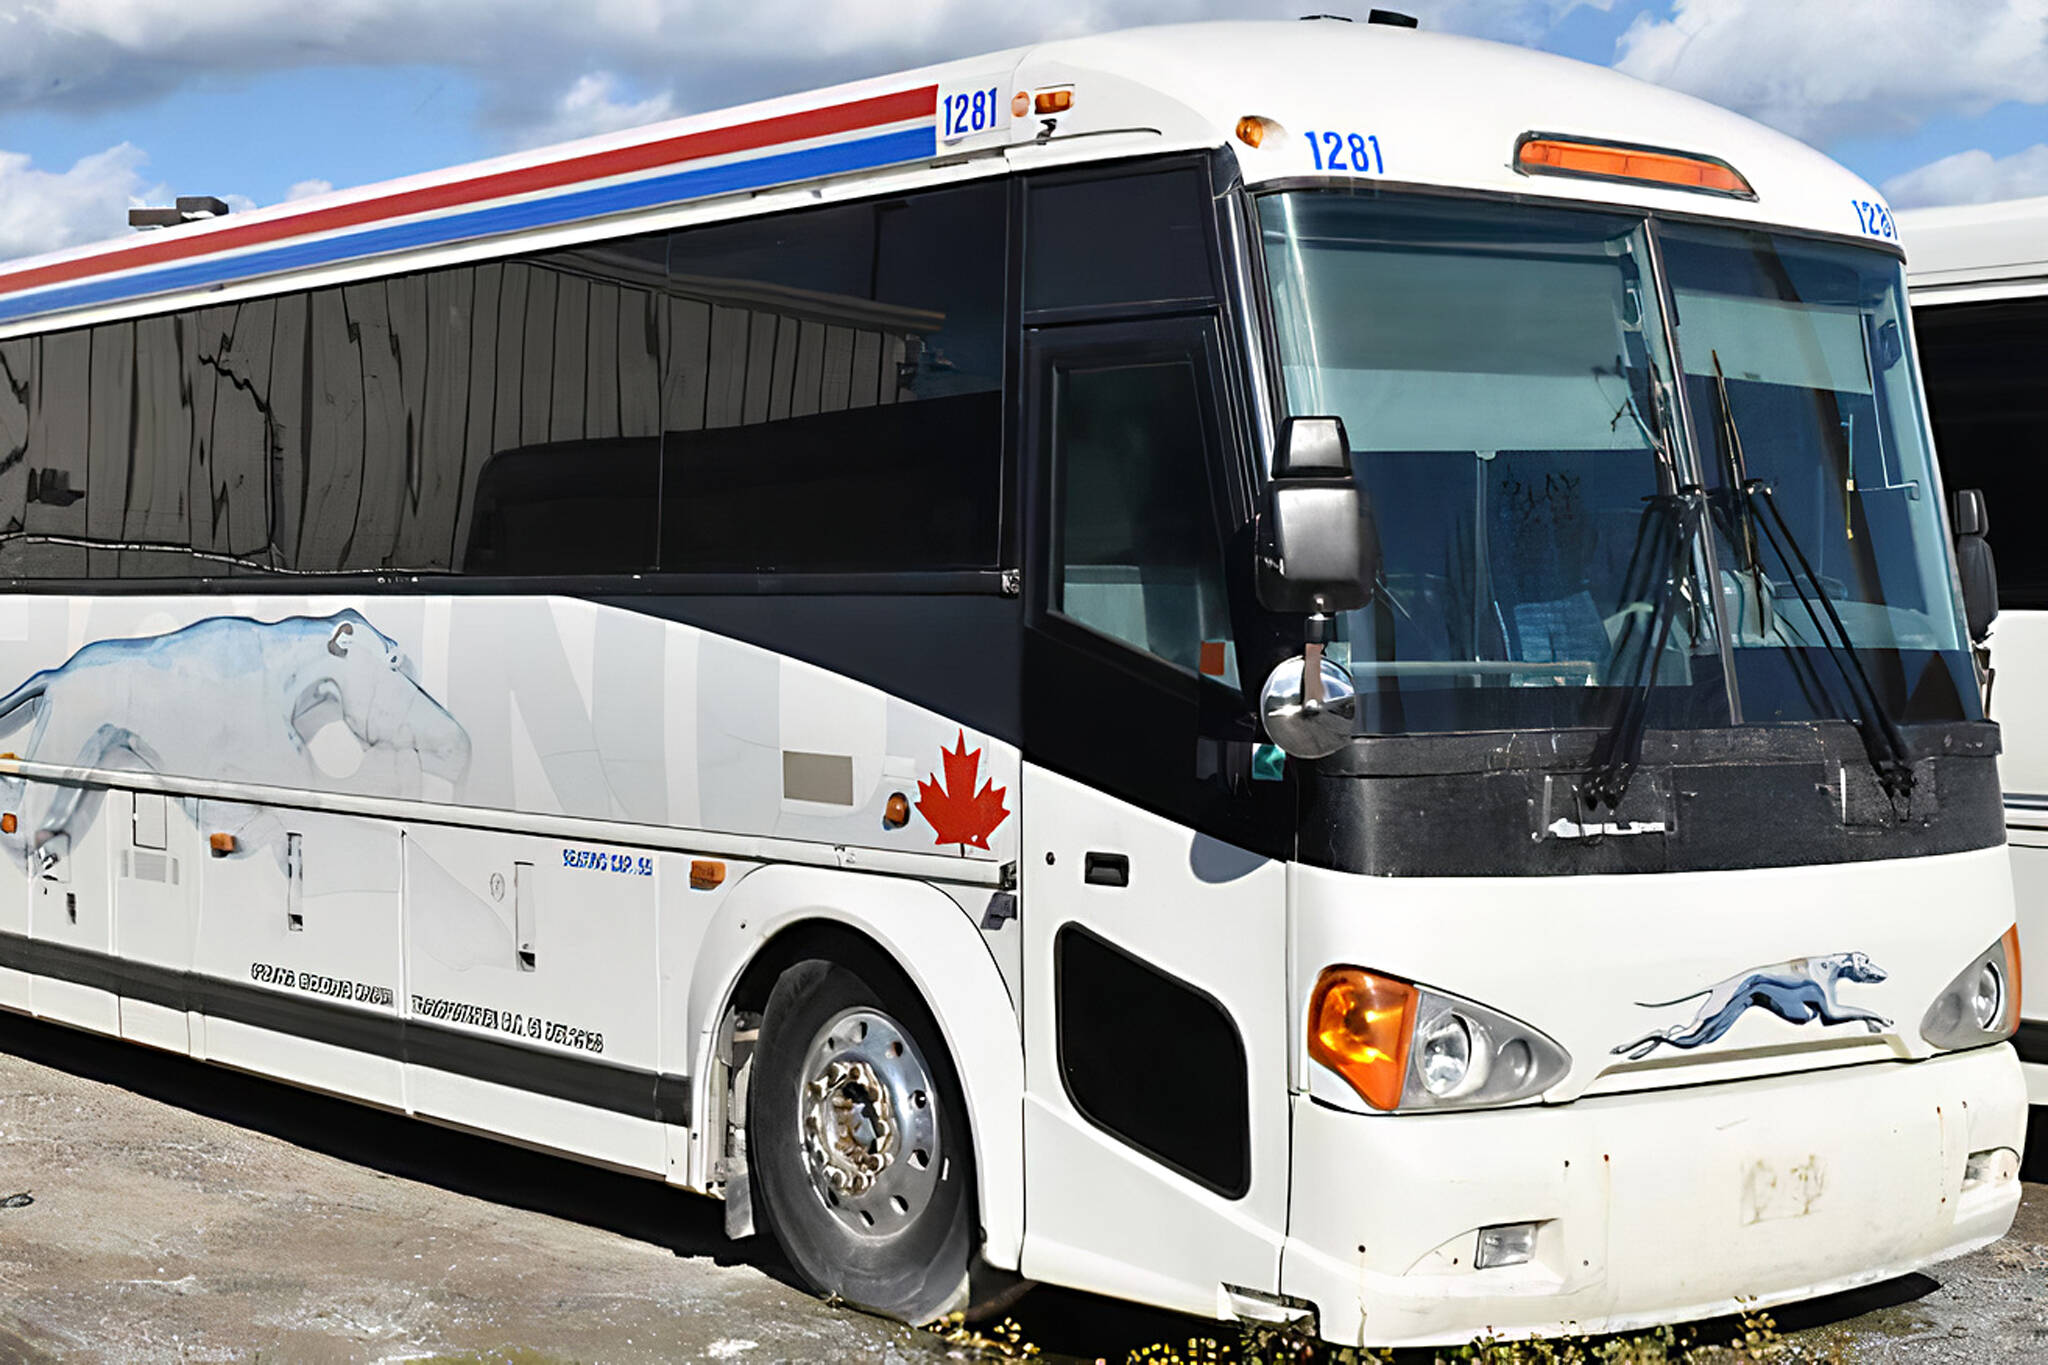 You can buy a Greyhound Canada bus in an upcoming Toronto auction